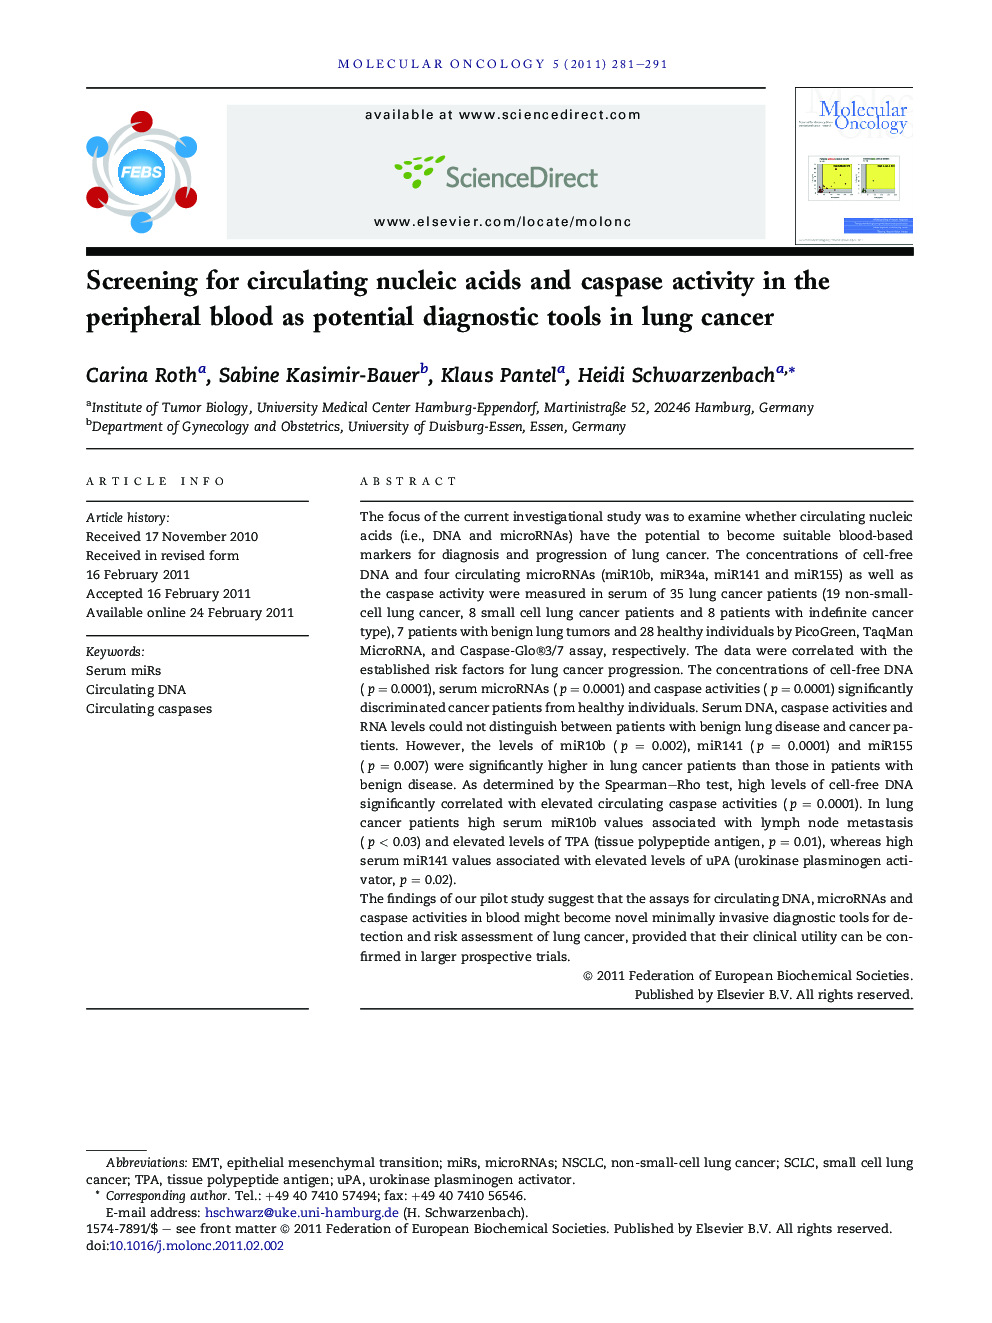 Screening for circulating nucleic acids and caspase activity in the peripheral blood as potential diagnostic tools in lung cancer